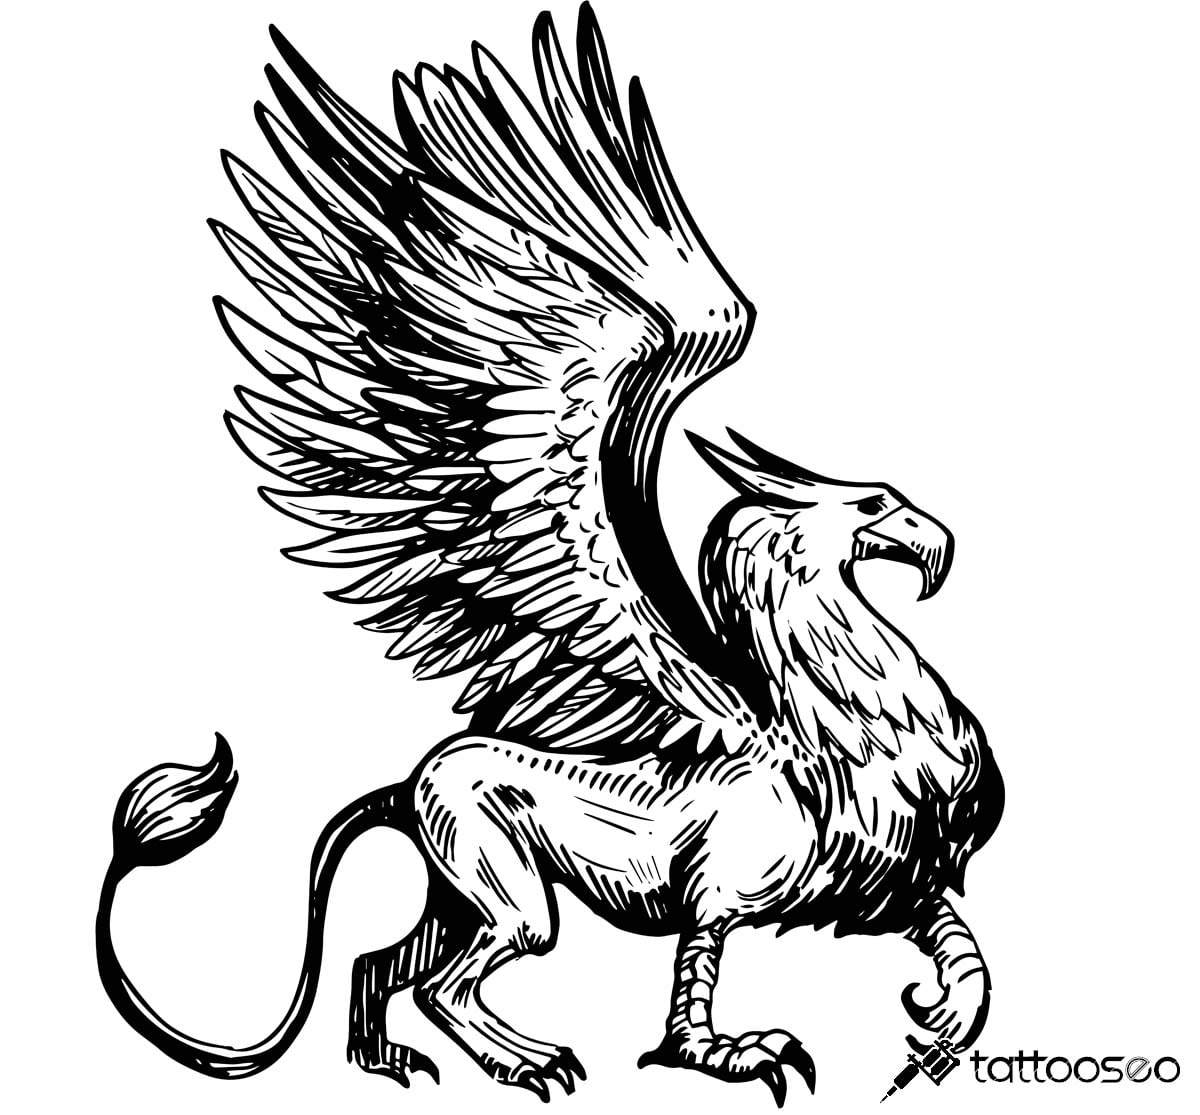 Griffin Tattoo Meaning, Designs & Ideas - Tattoo SEO